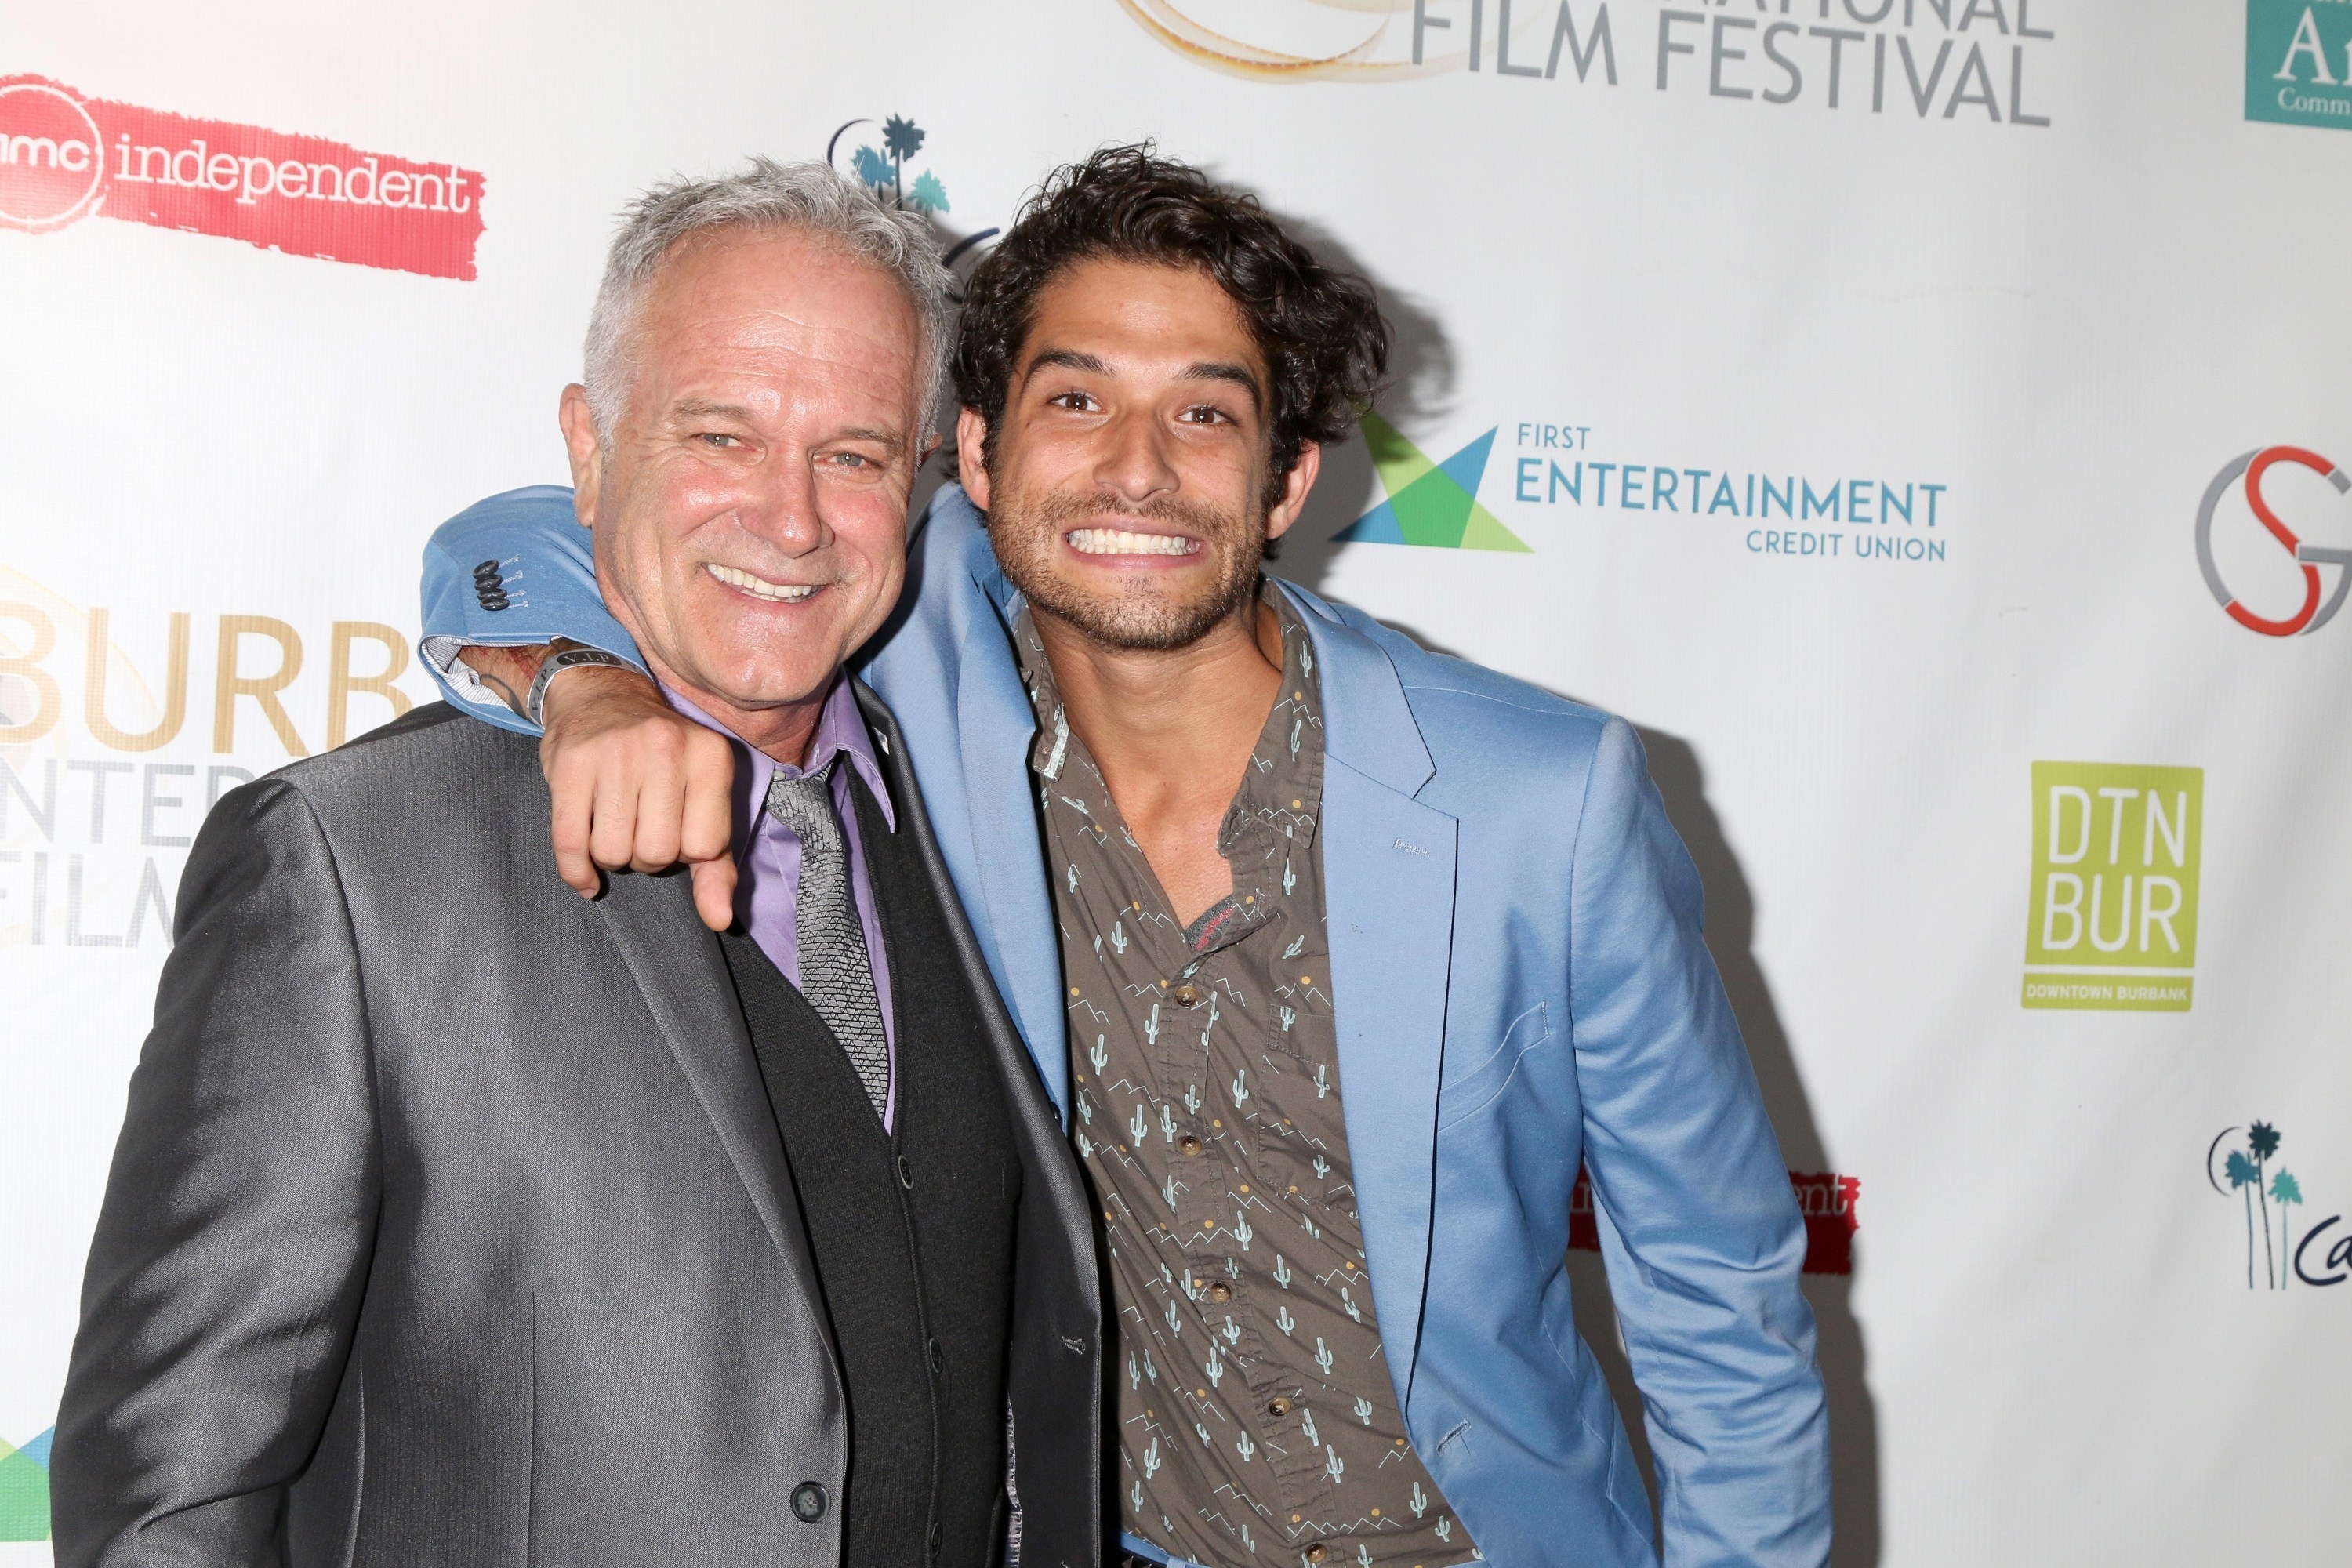 John and Tyler Posey smile together on the red carpet